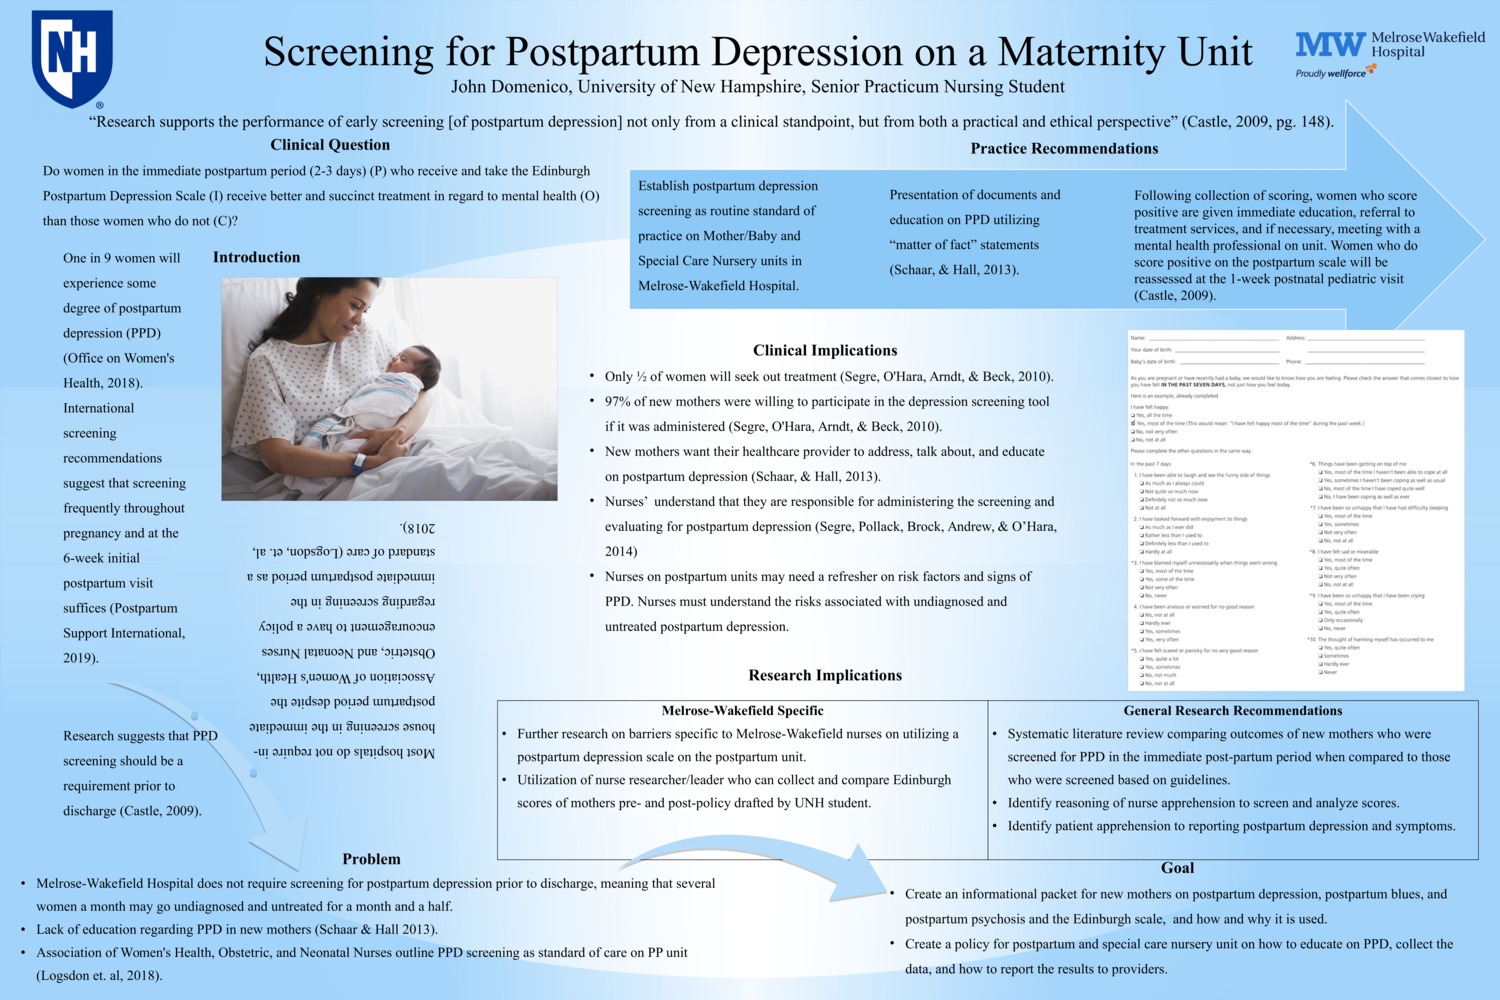 Screening For Postpartum Depression On A Maternity Unit by jrd2006